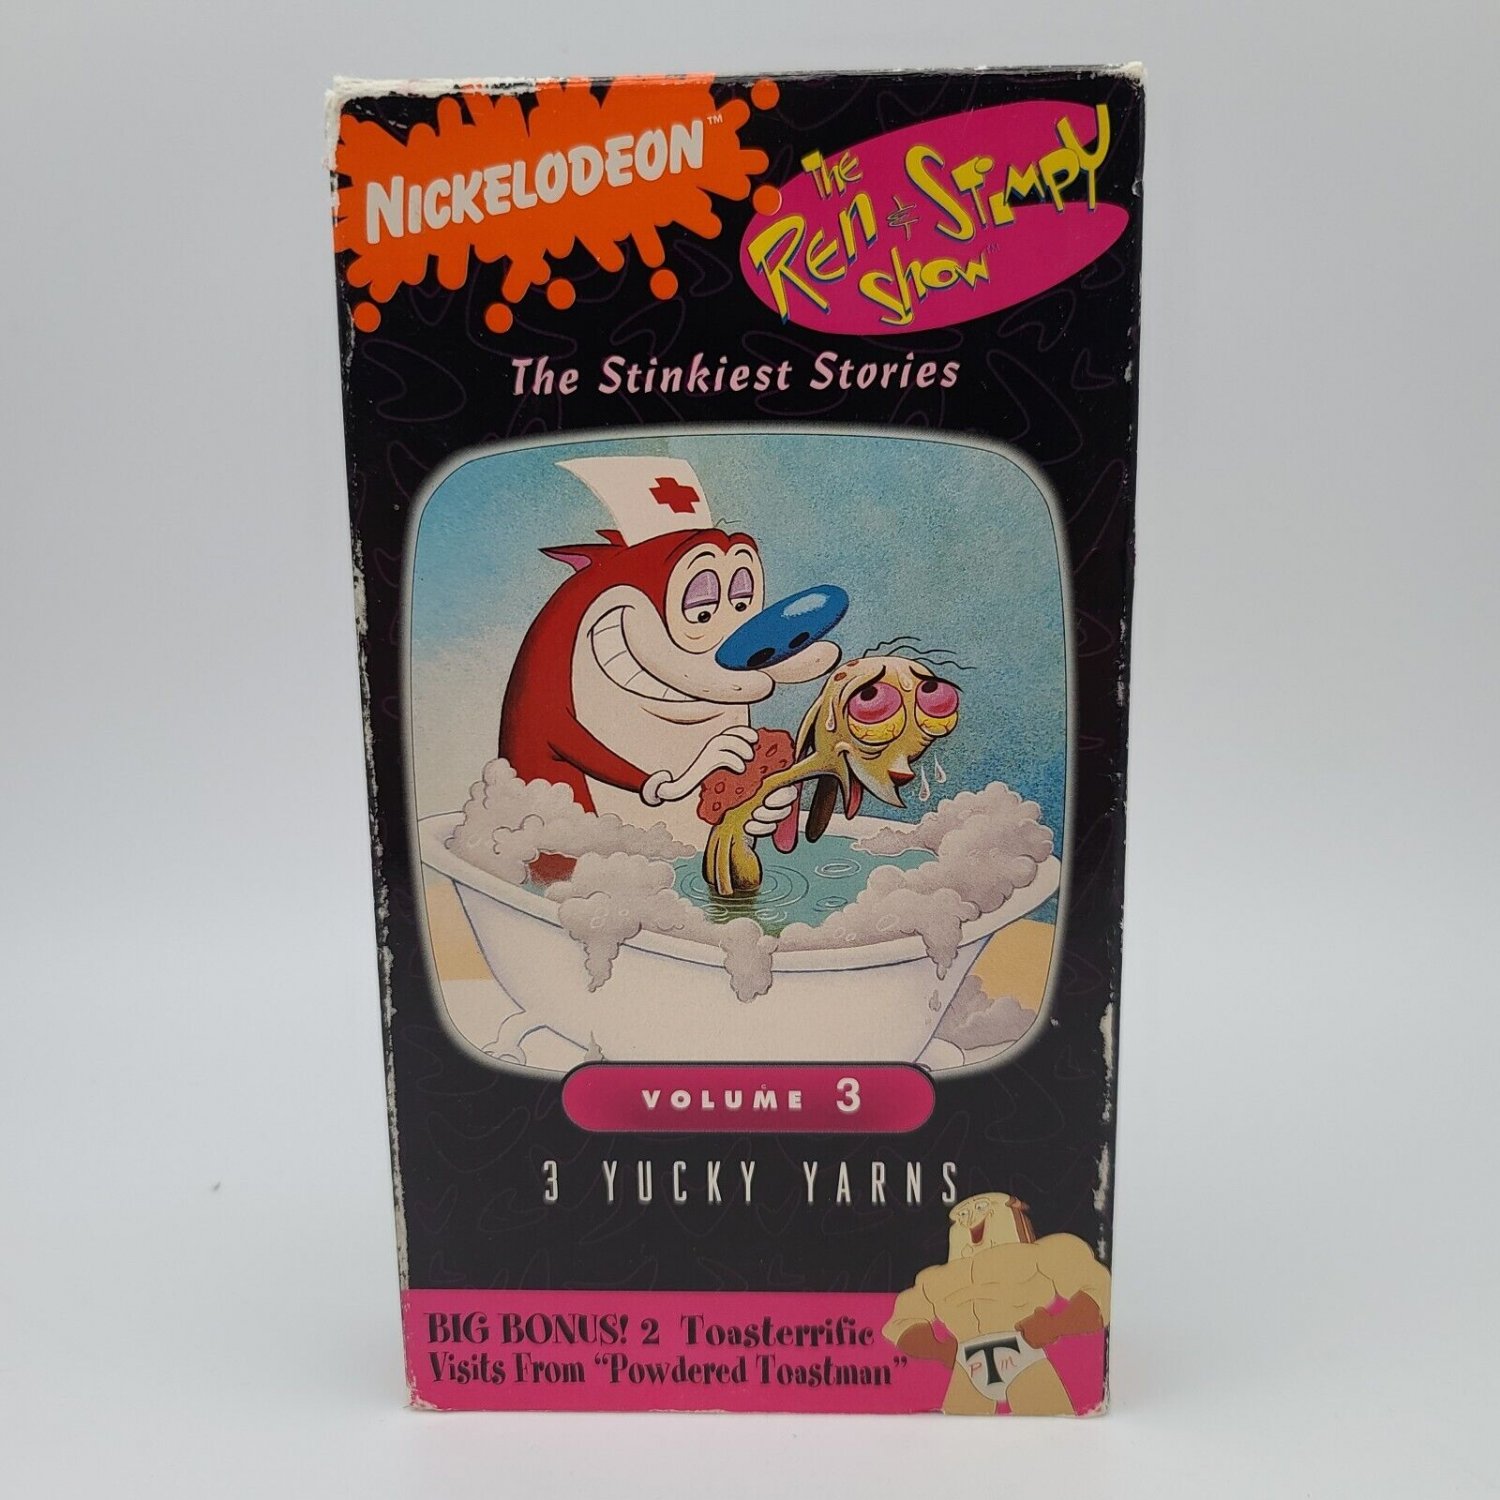 Nickelodeon The Ren and Stimpy Show: The Stinkiest Stories Vol 3 Yucky Yarn